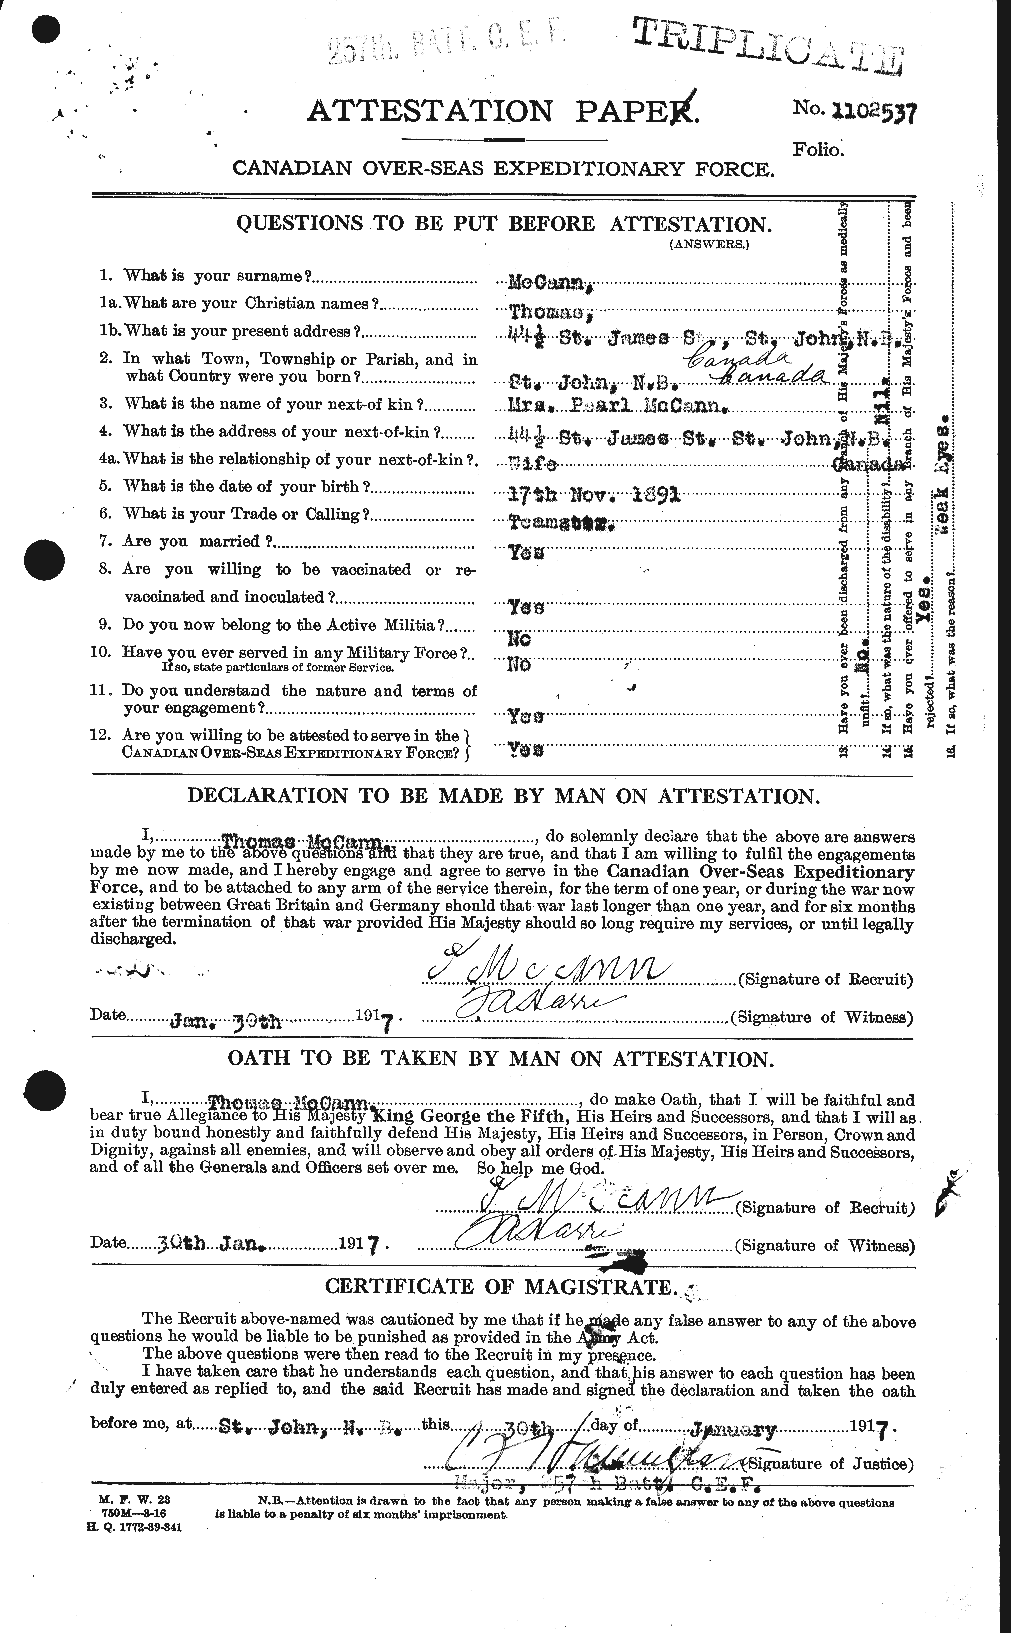 Personnel Records of the First World War - CEF 132671a